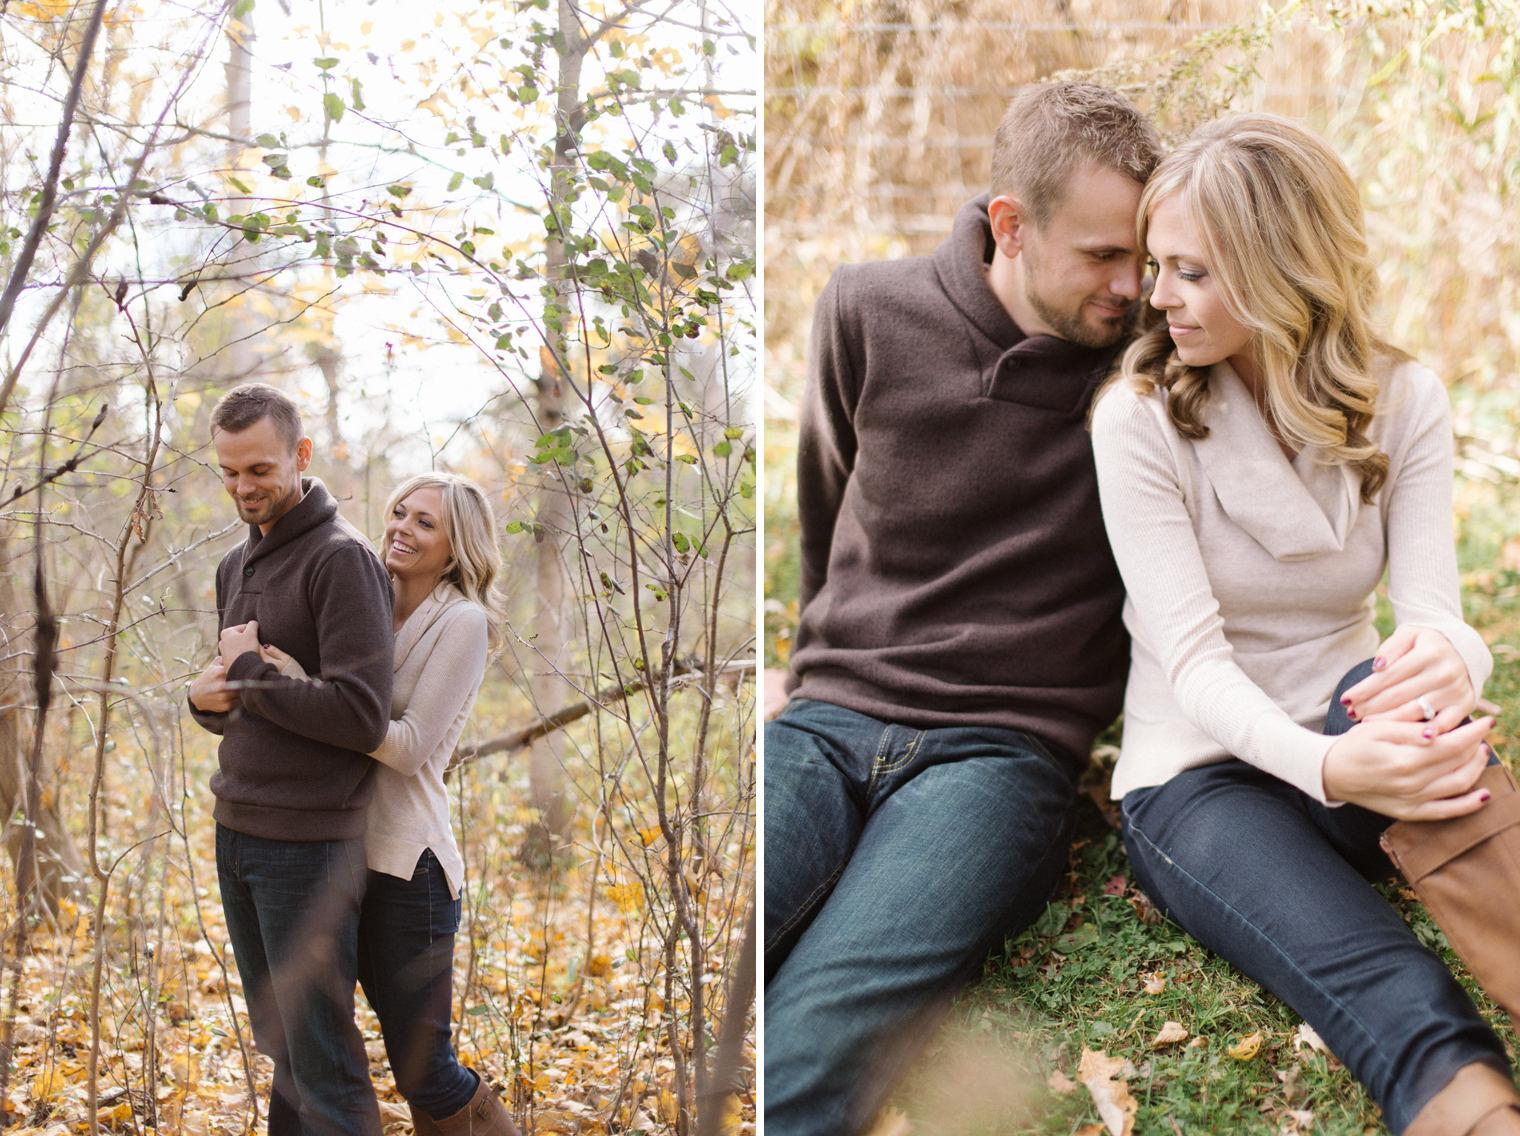 Fall couples photography at the Ann Arbor Botanical Gardens.